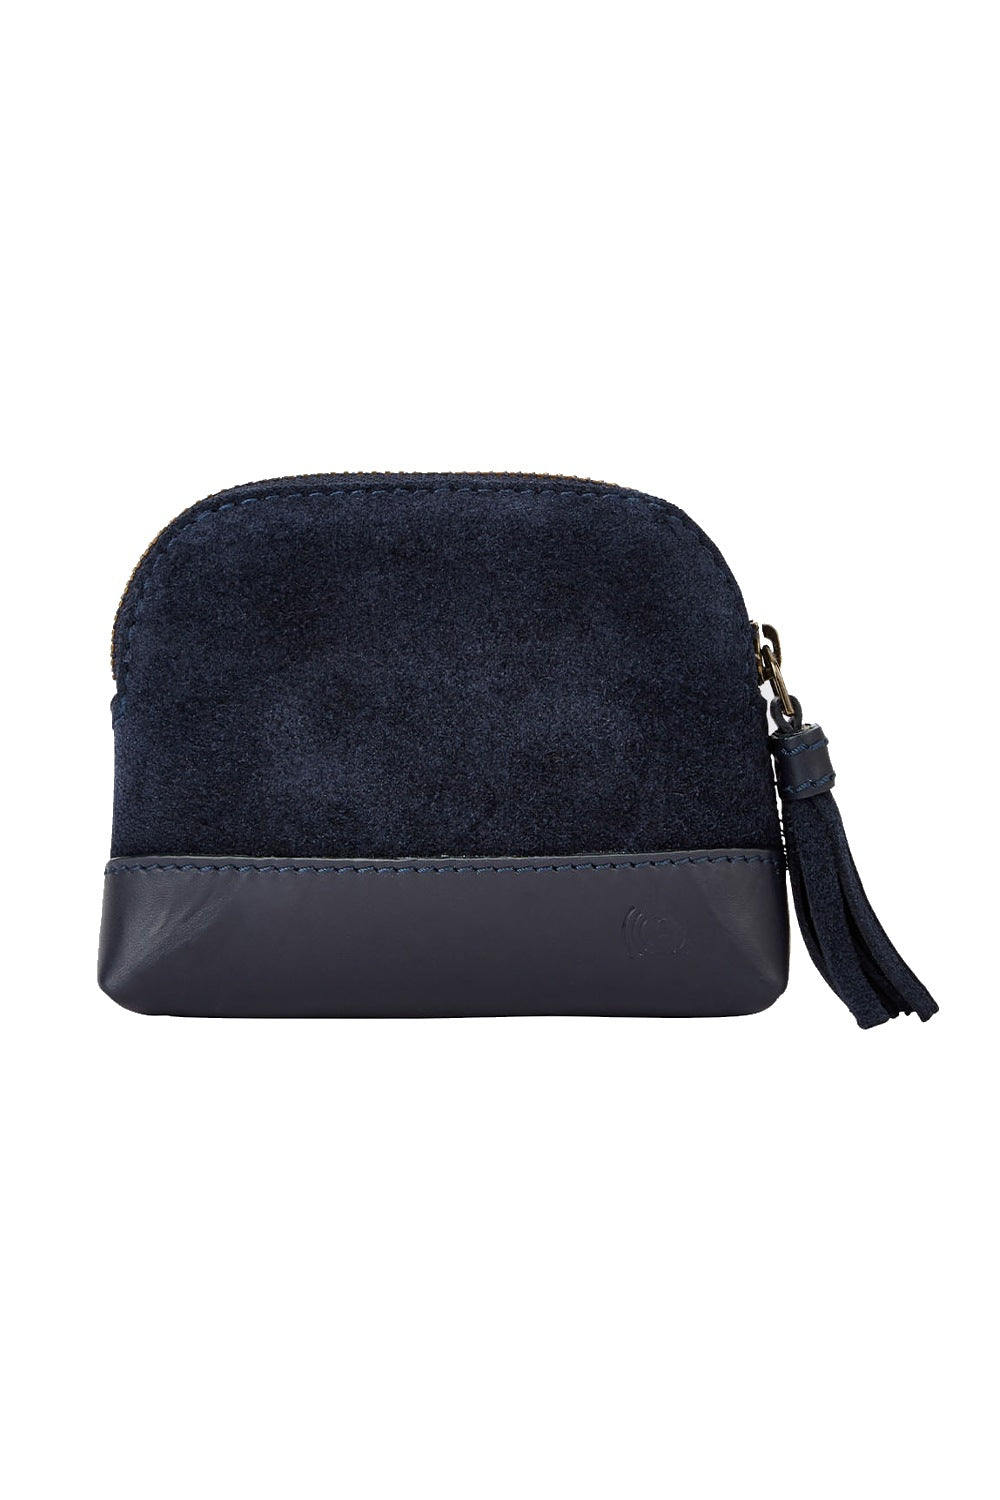 Dubarry Richmond Suede Purse in French Navy